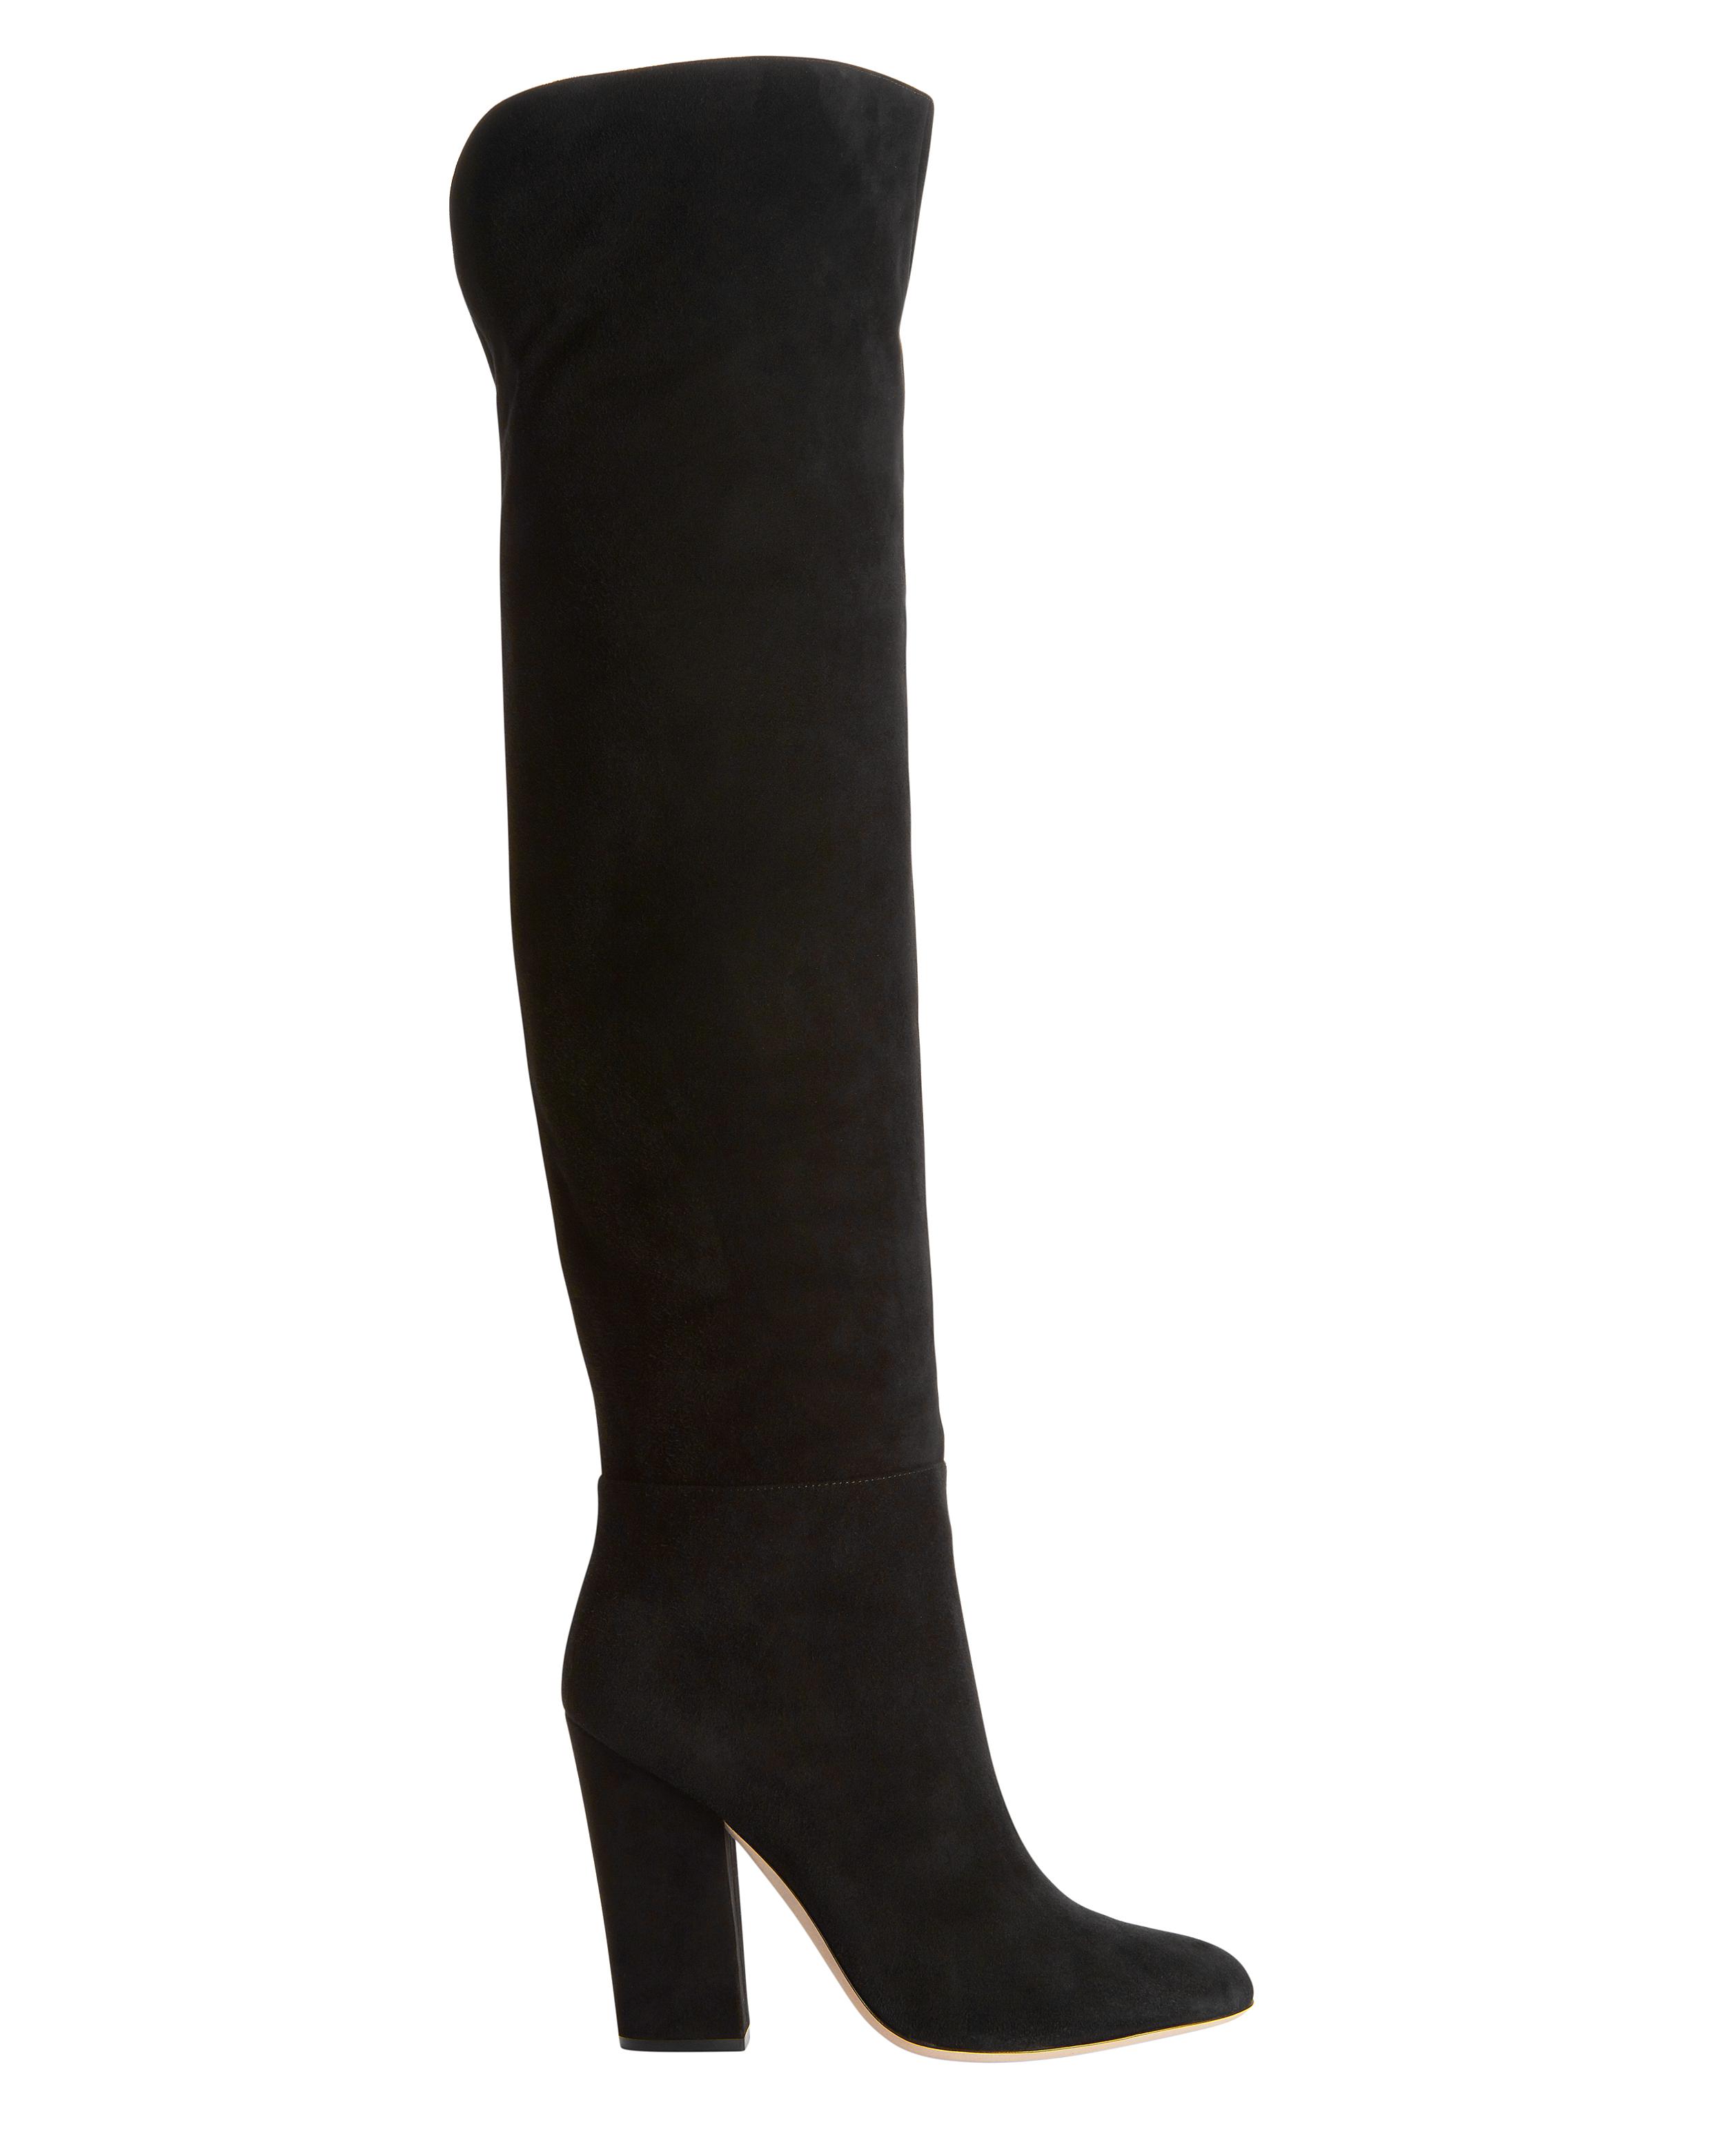 Sergio Rossi Virginia Suede Over-the-knee Boots in Black - Lyst